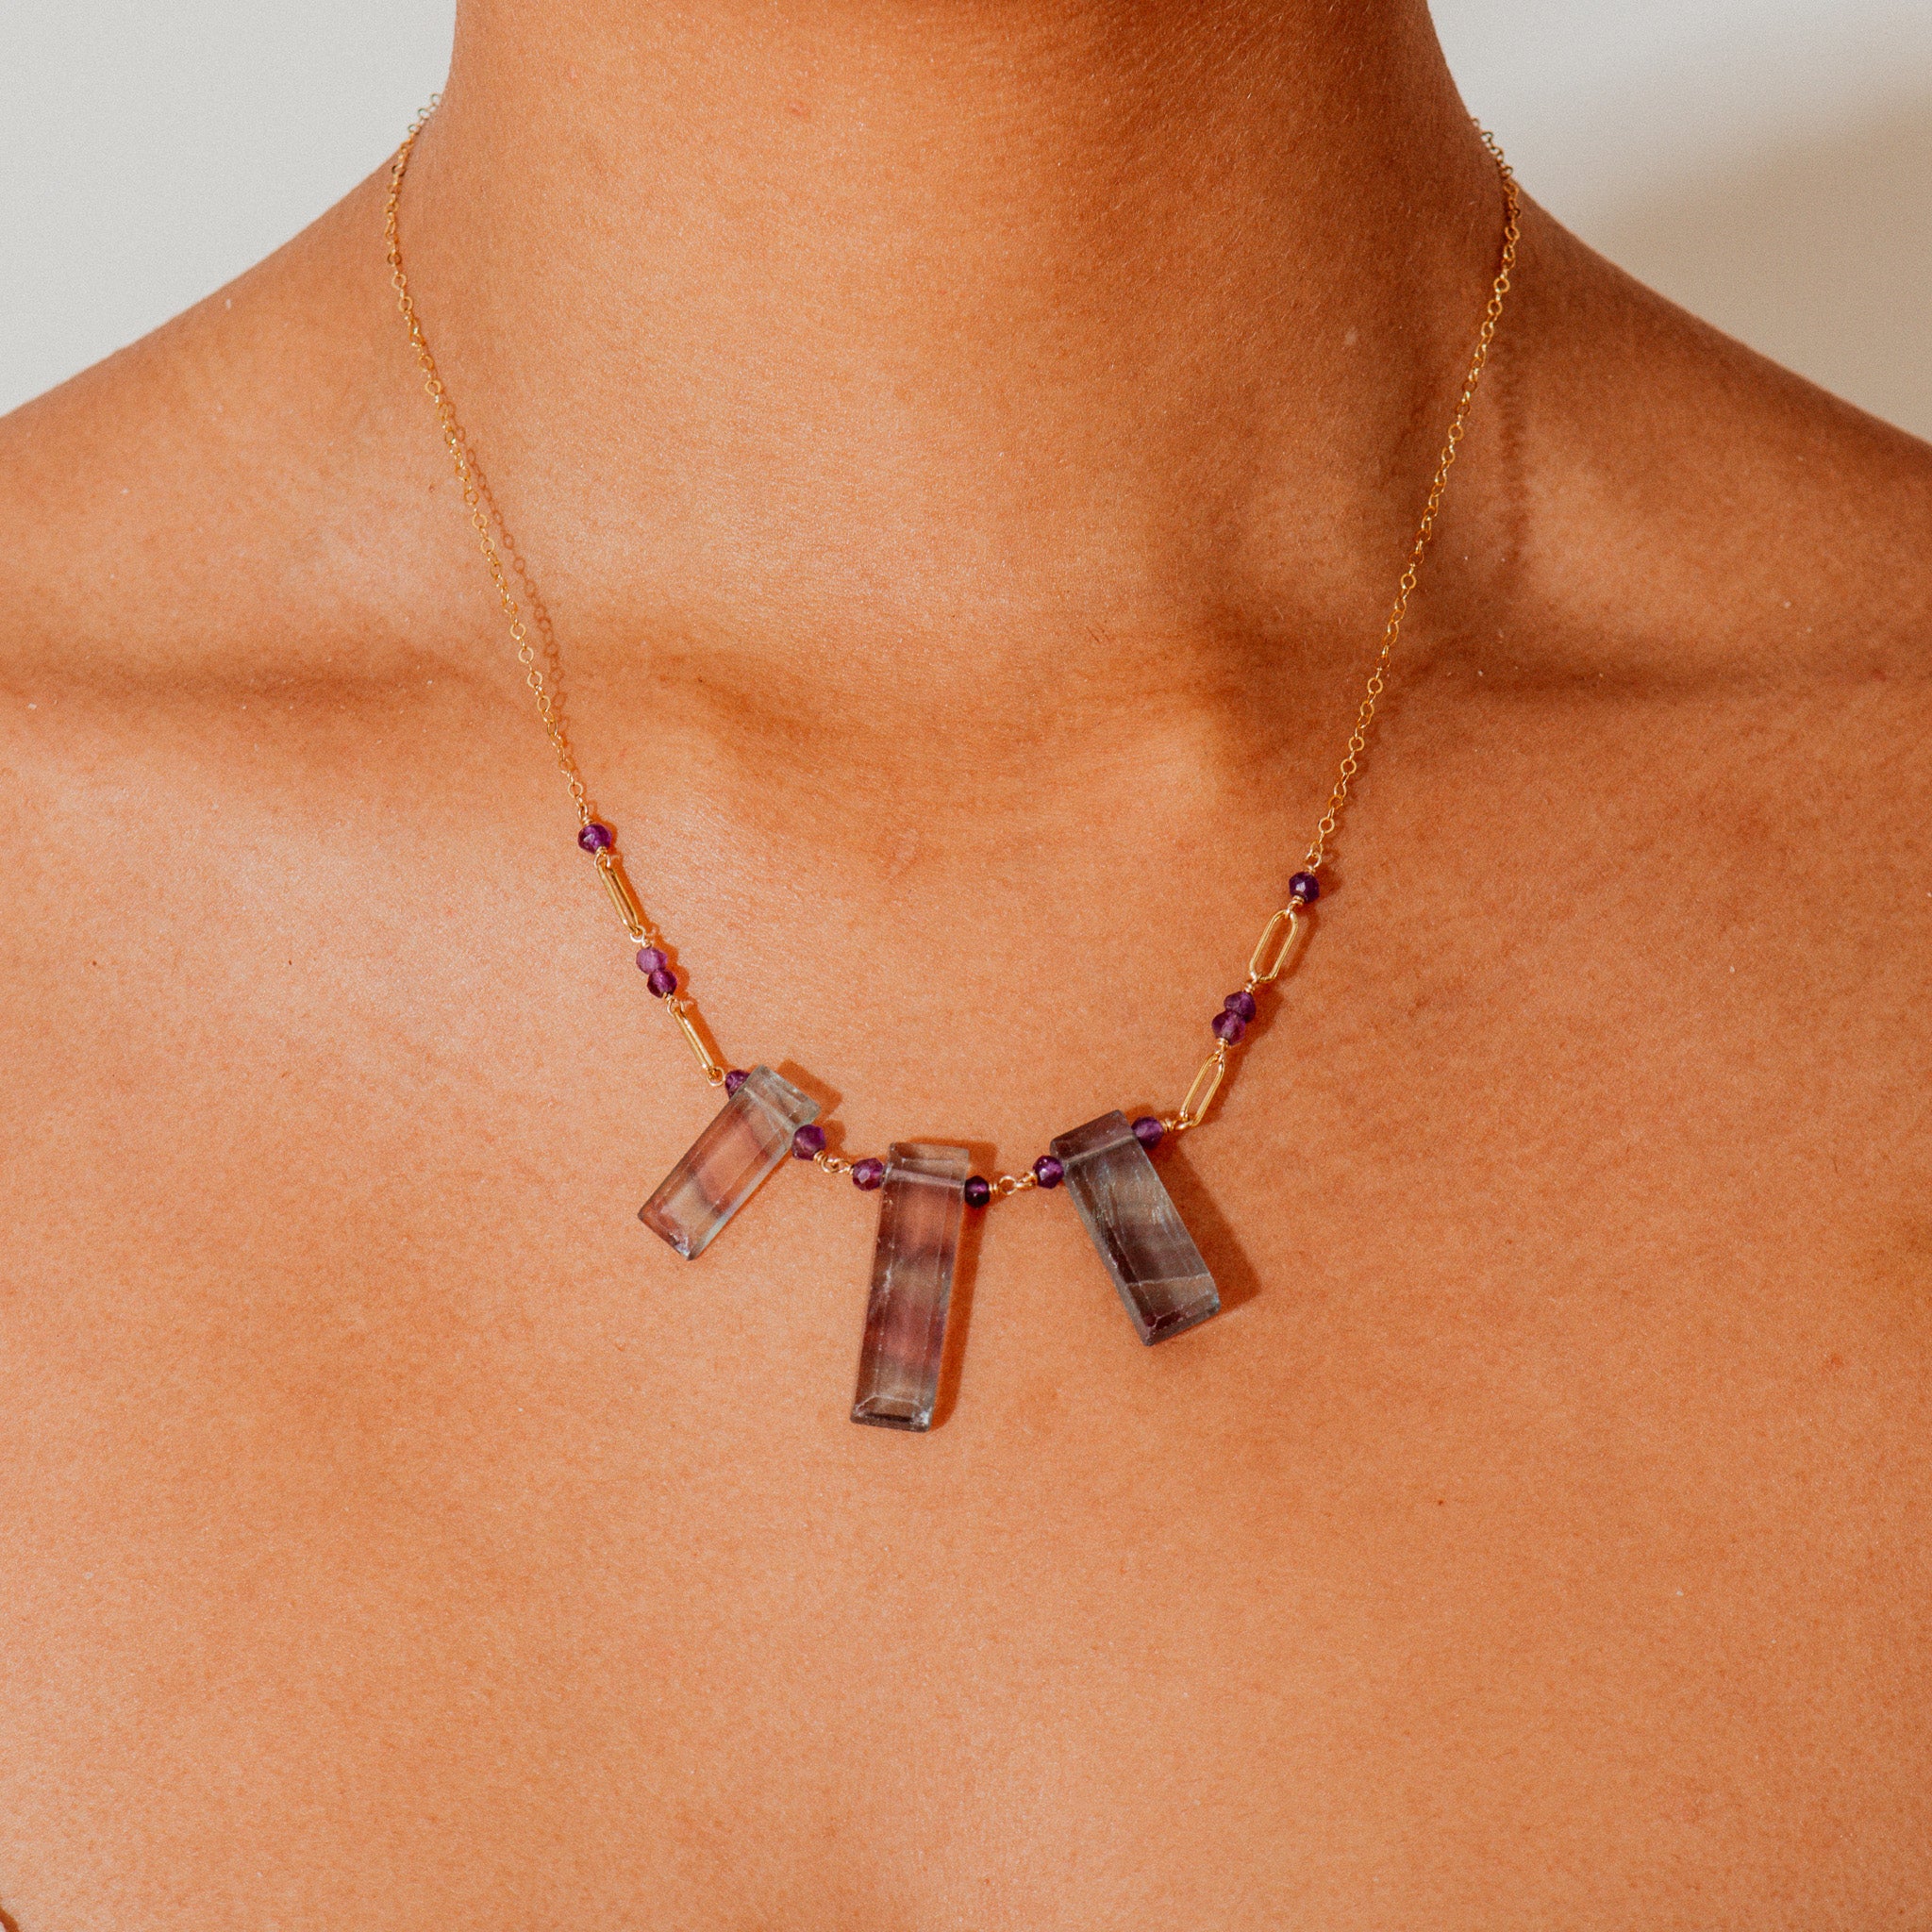 Fluorite Inset Necklace